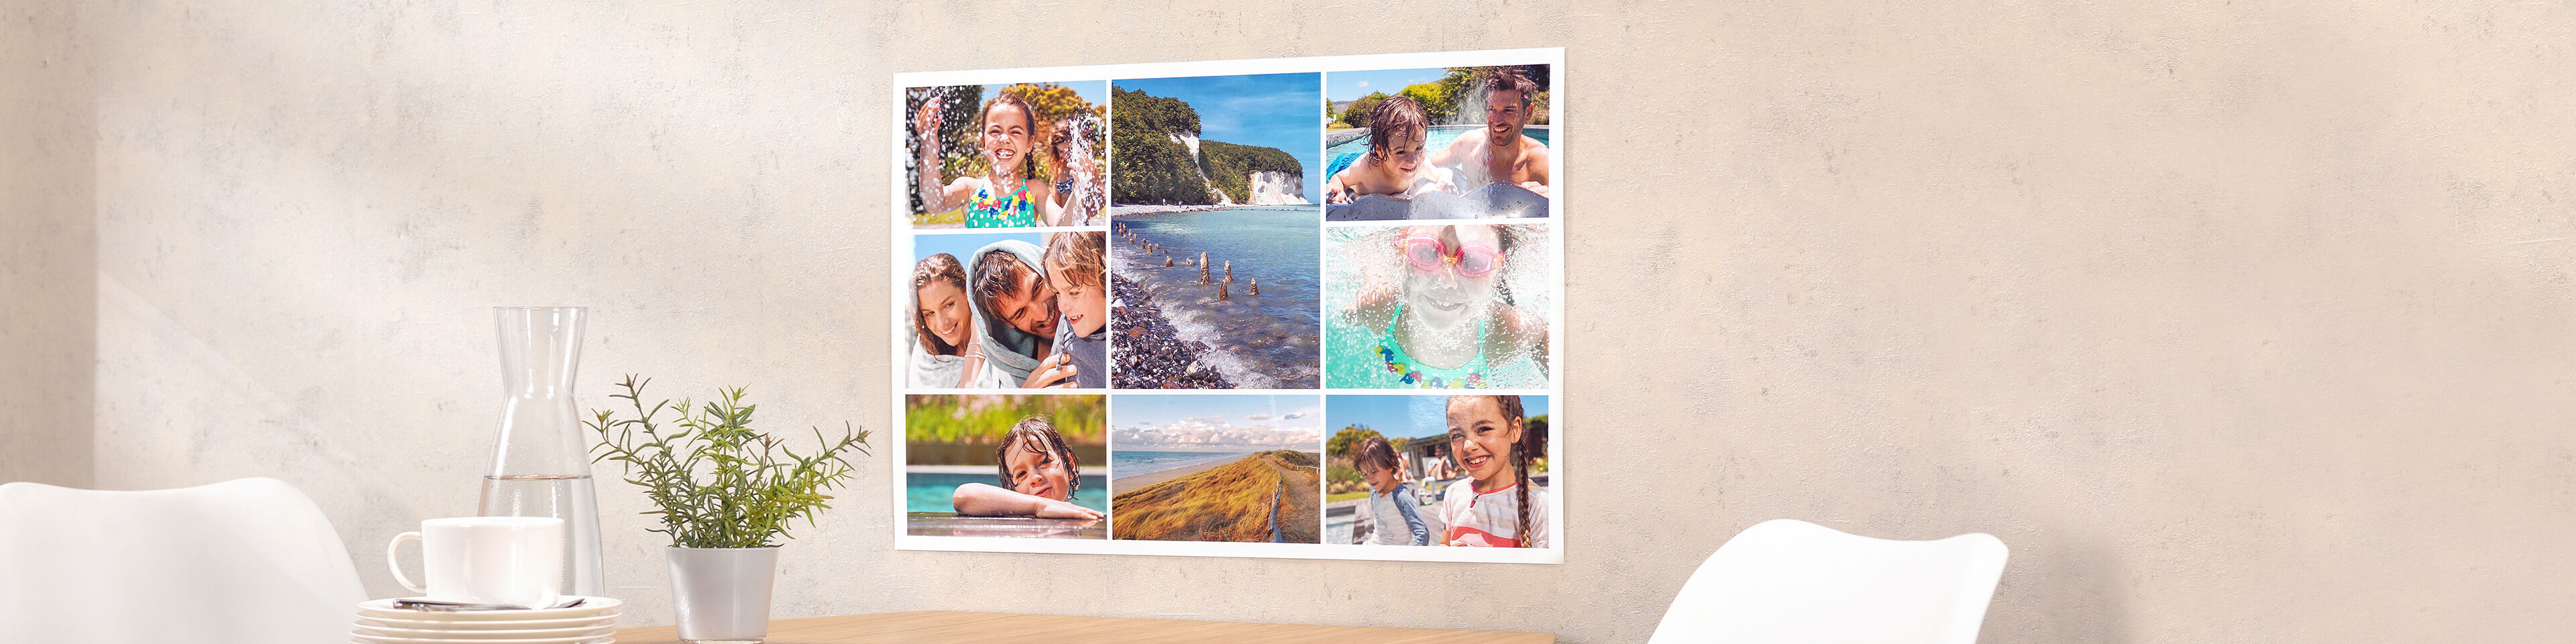 large collage of family photos printed as wall art for your home.